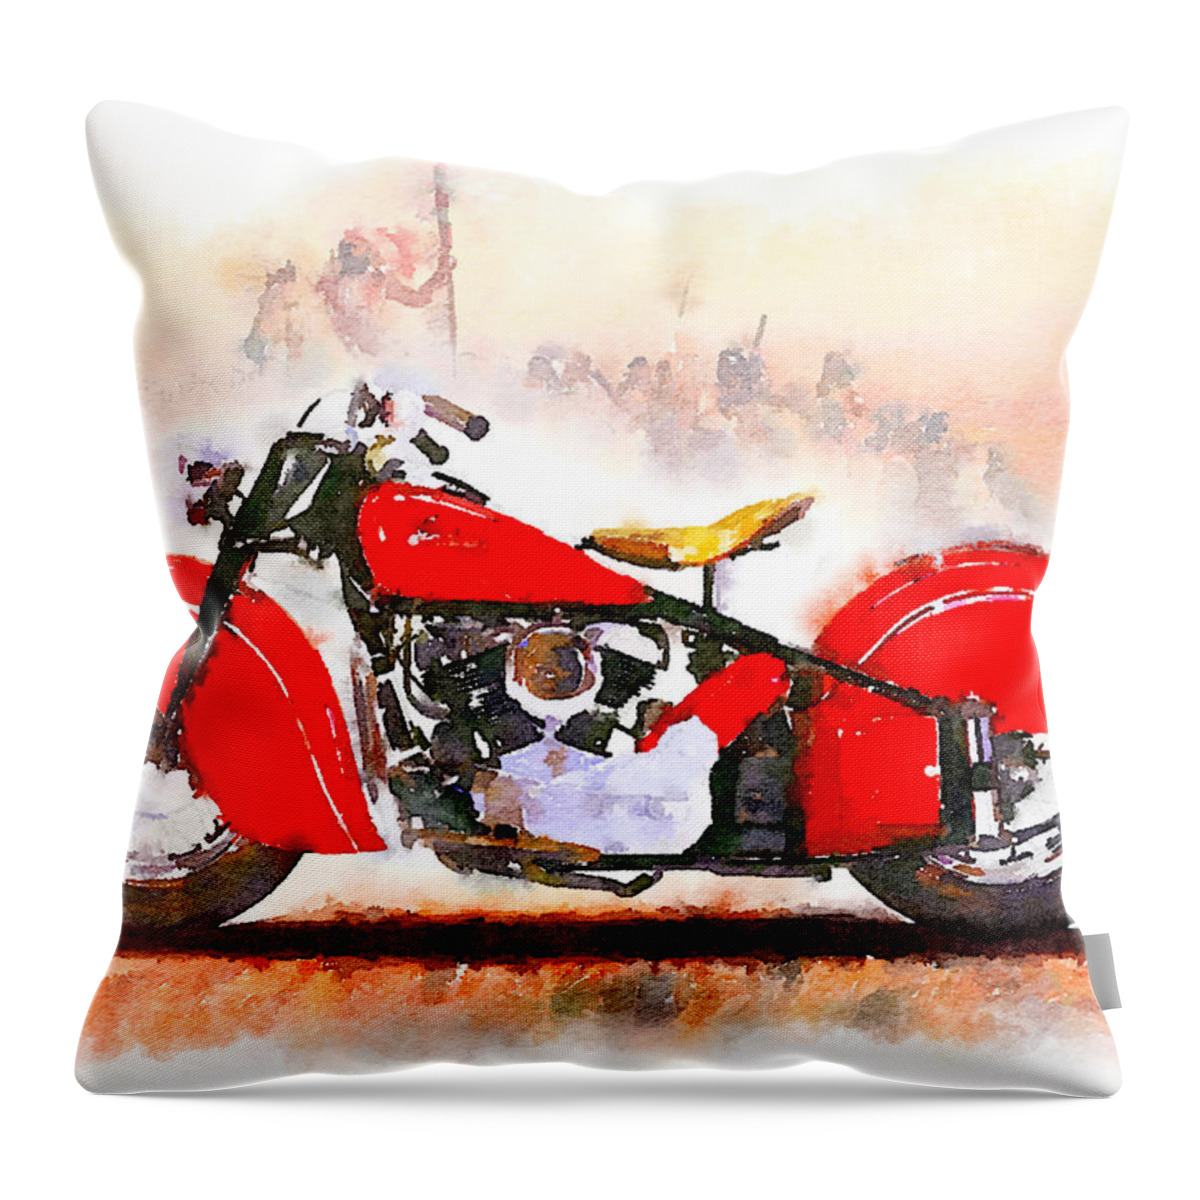 Watercolor Throw Pillow featuring the painting Watercolor Classic Indian motorcycle by Vart by Vart